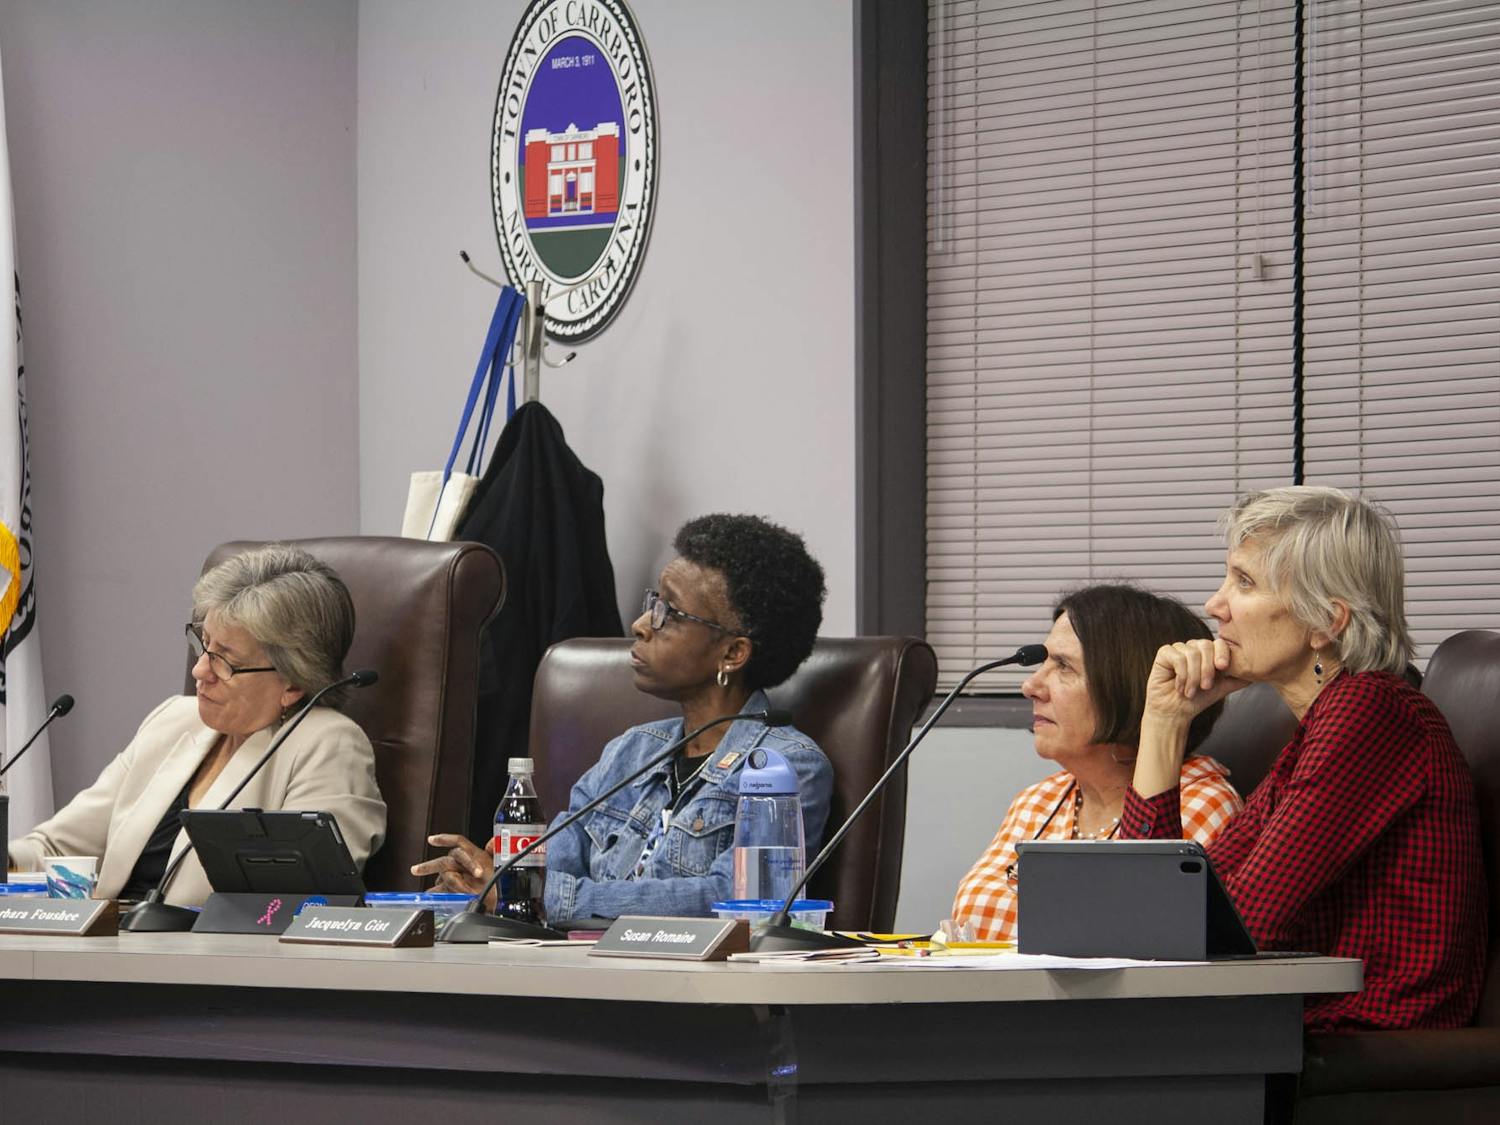 (From left) Carrboro Mayor Lydia Lavelle and Council Members Barbara Foushee, Jacquelyn Gist and Susan Romaine listen to residents speak about UNC's coal plant on Feb. 4, 2020. A resolution calling for UNC to cease operations of this plant has been proposed to the Town Council and is an ongoing debate.